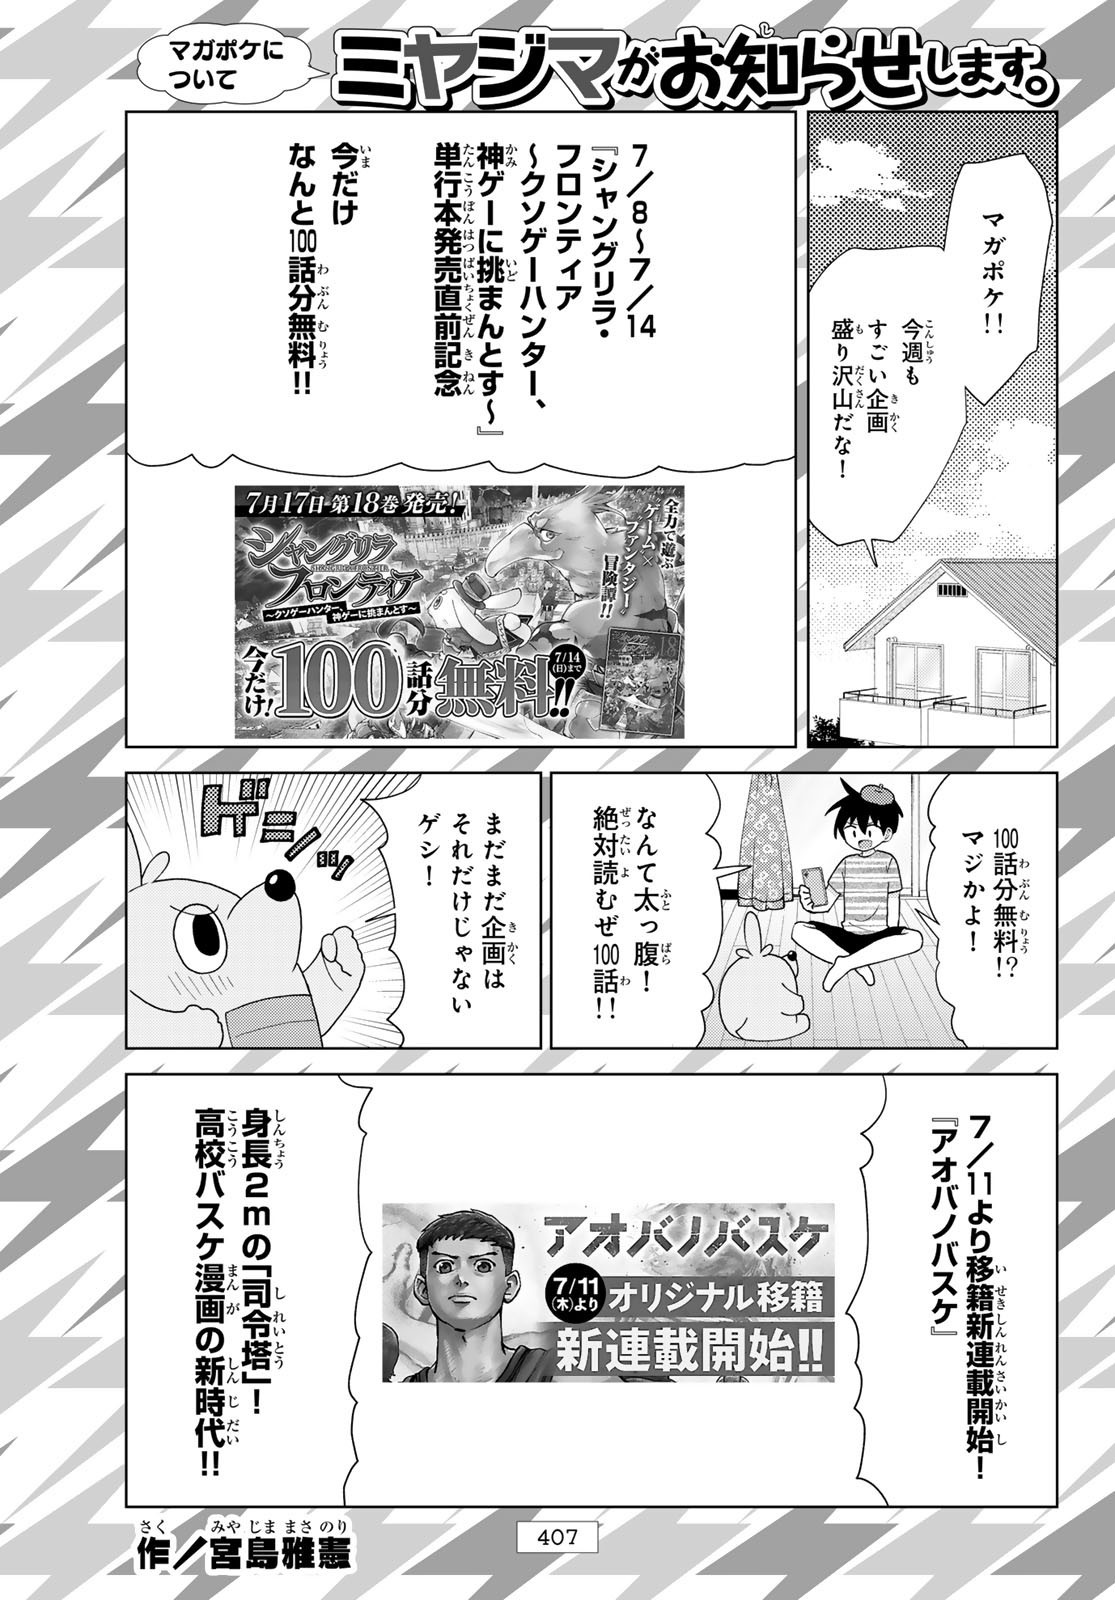 Weekly Shōnen Magazine - 週刊少年マガジン - Chapter 2024-32 - Page 405